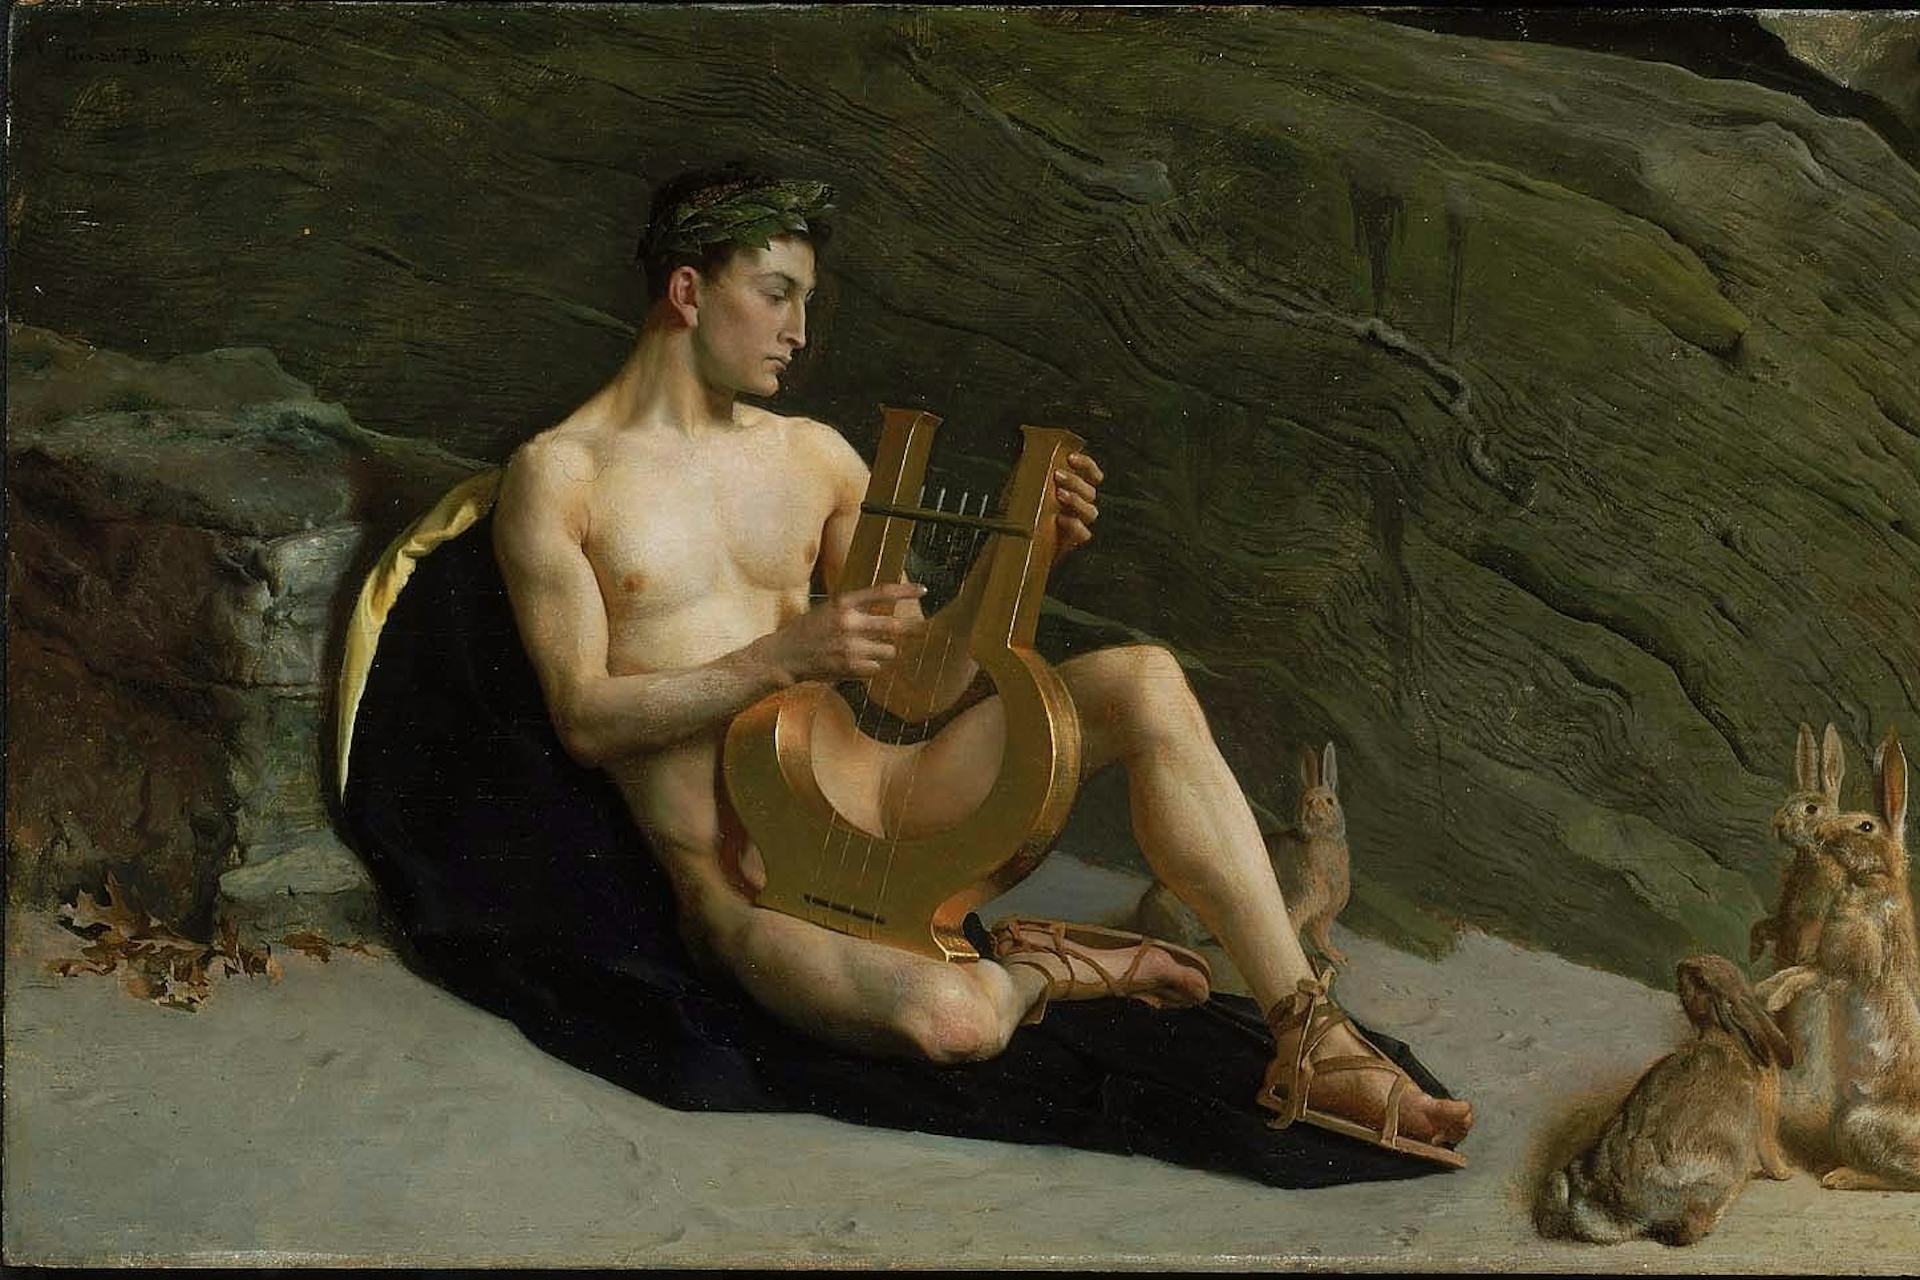 Orpheus by George de Forest Brush (1890)